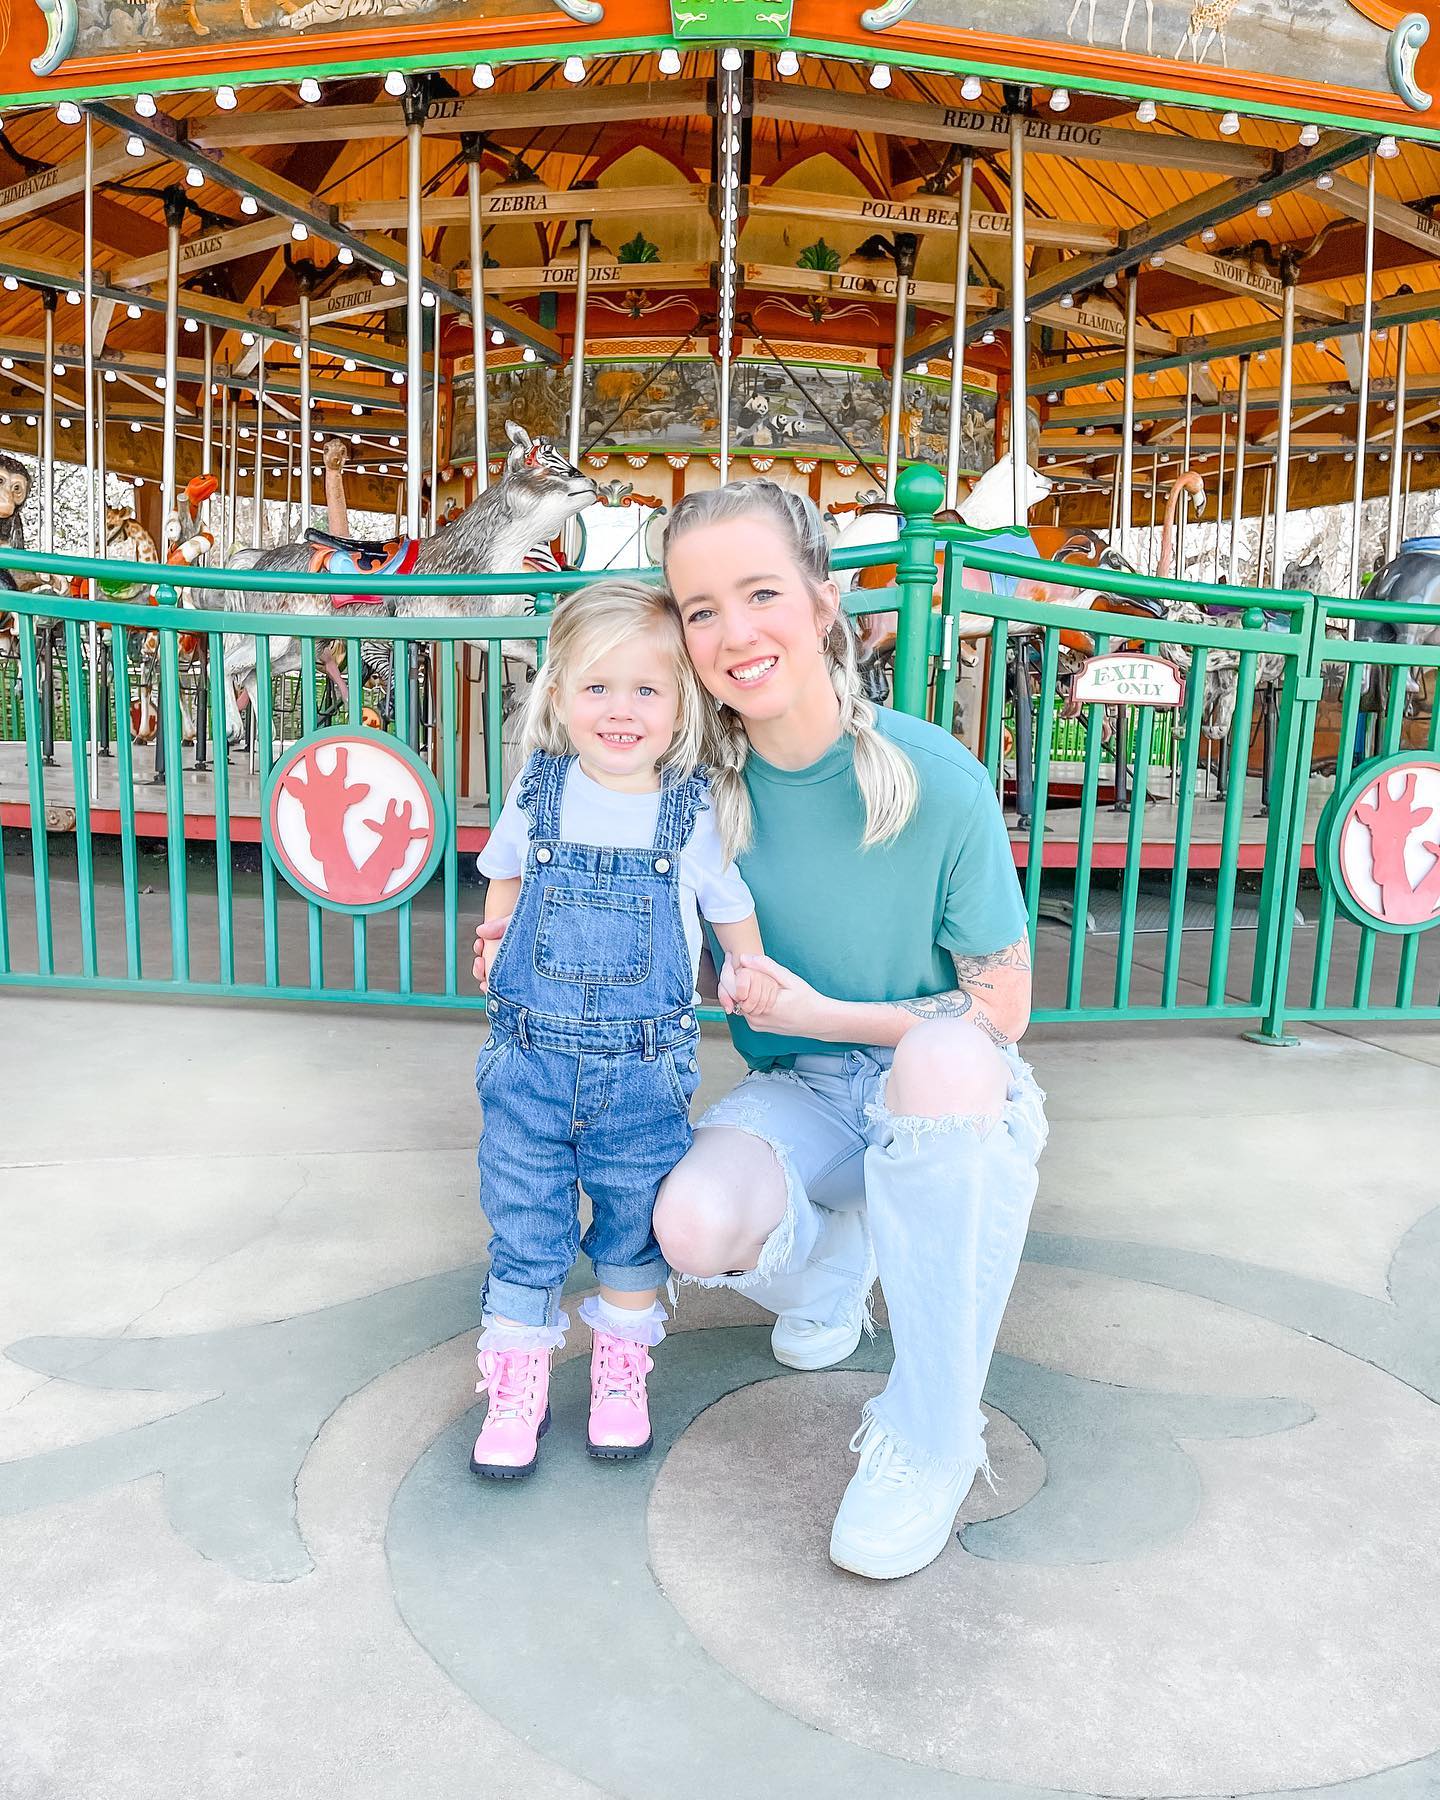 Brooke Hall with her daughter posing in front of the carousel at Nashville Zoo